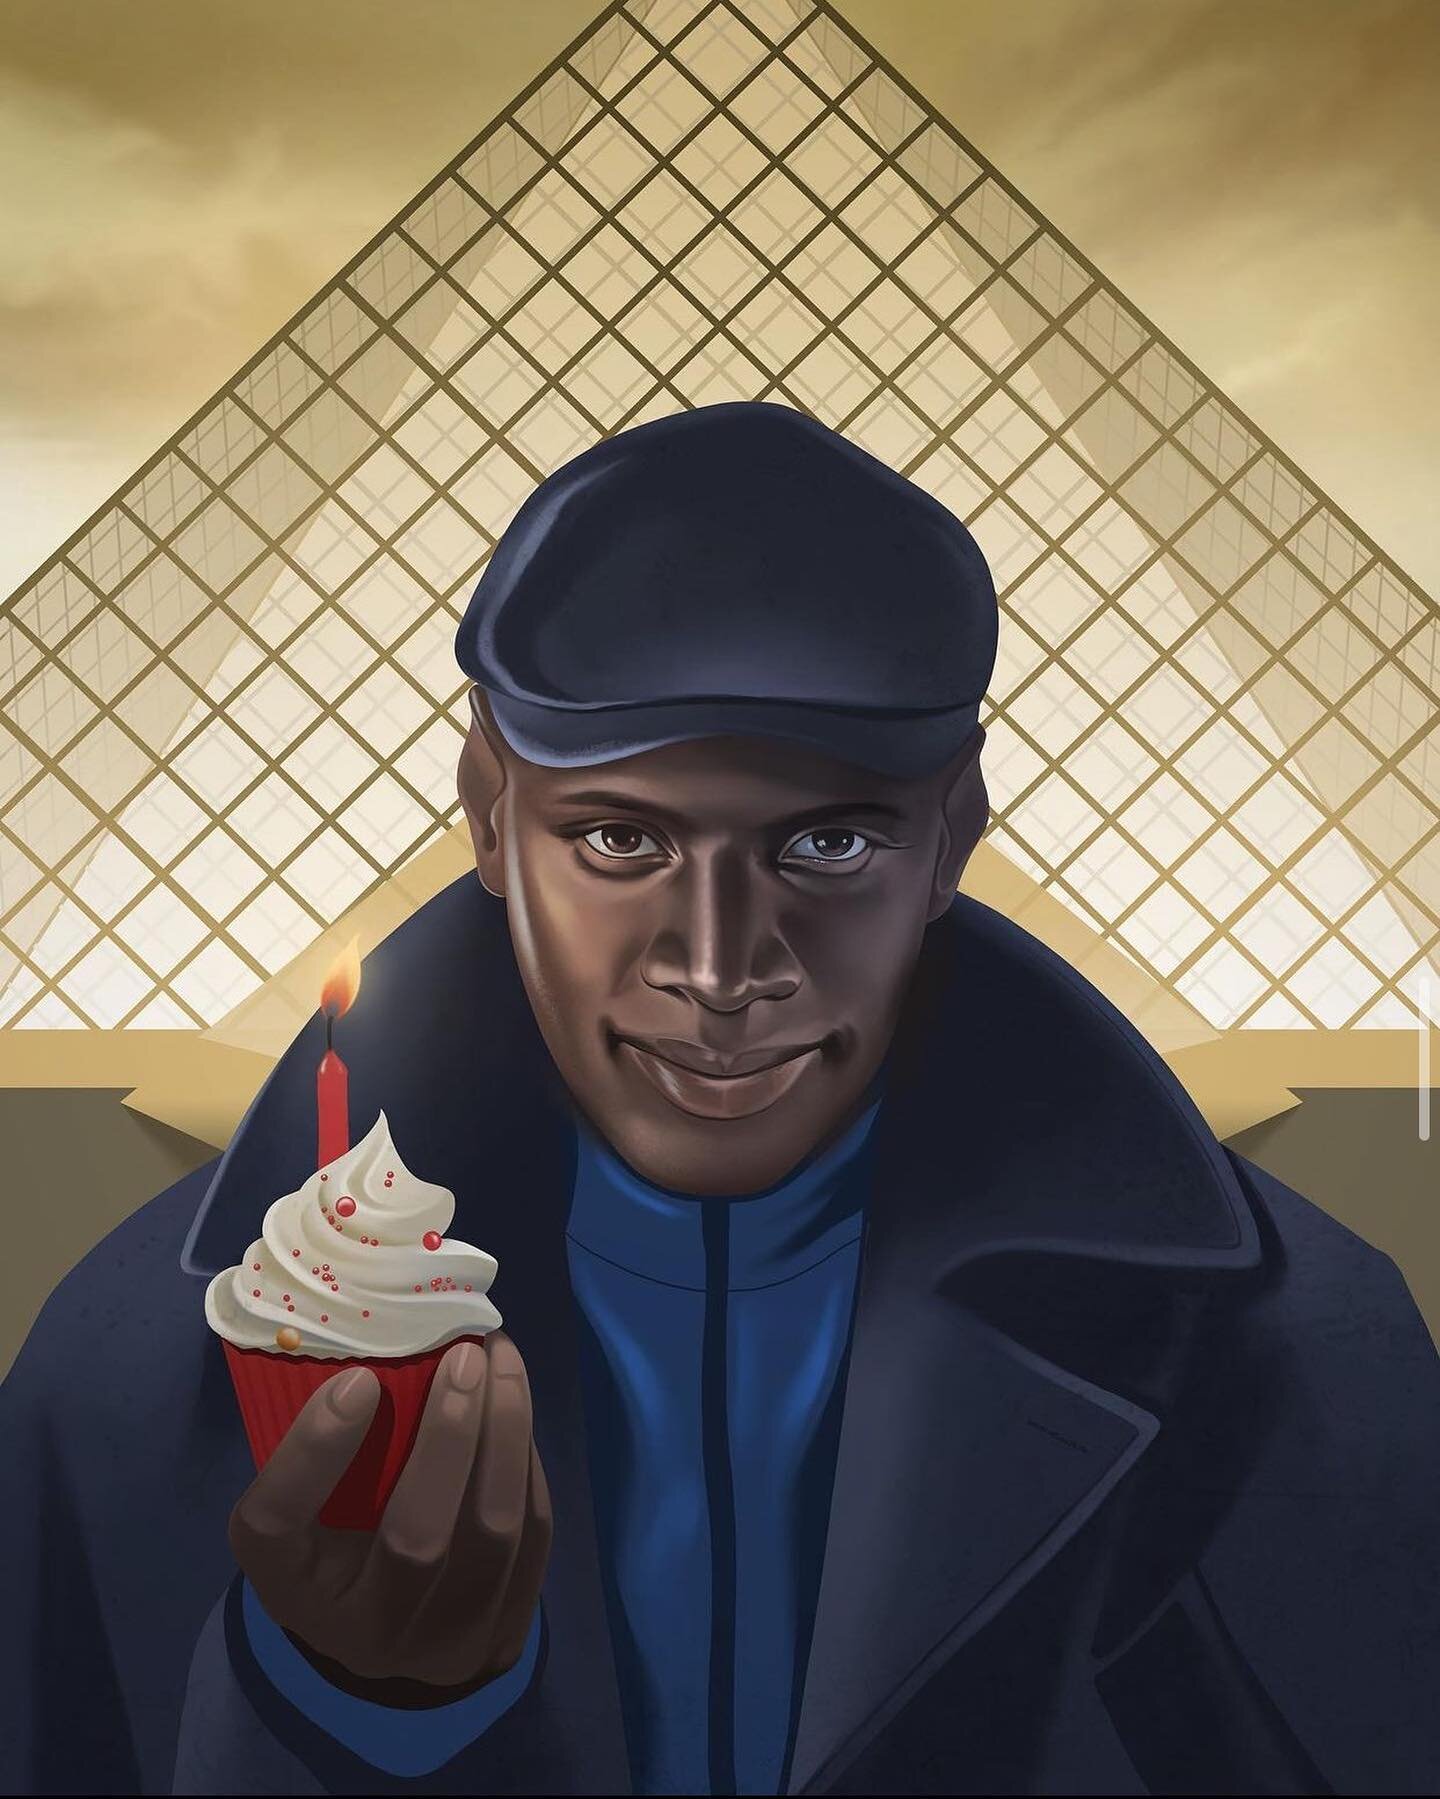 @netflixfr commissioned @rezabassiri to create a series of illustrations portraying Assane Diop wonderfully played by @omarsyofficial in some of the iconic scenes of the series. The illustrations were shared across all @netflix accounts and social ne